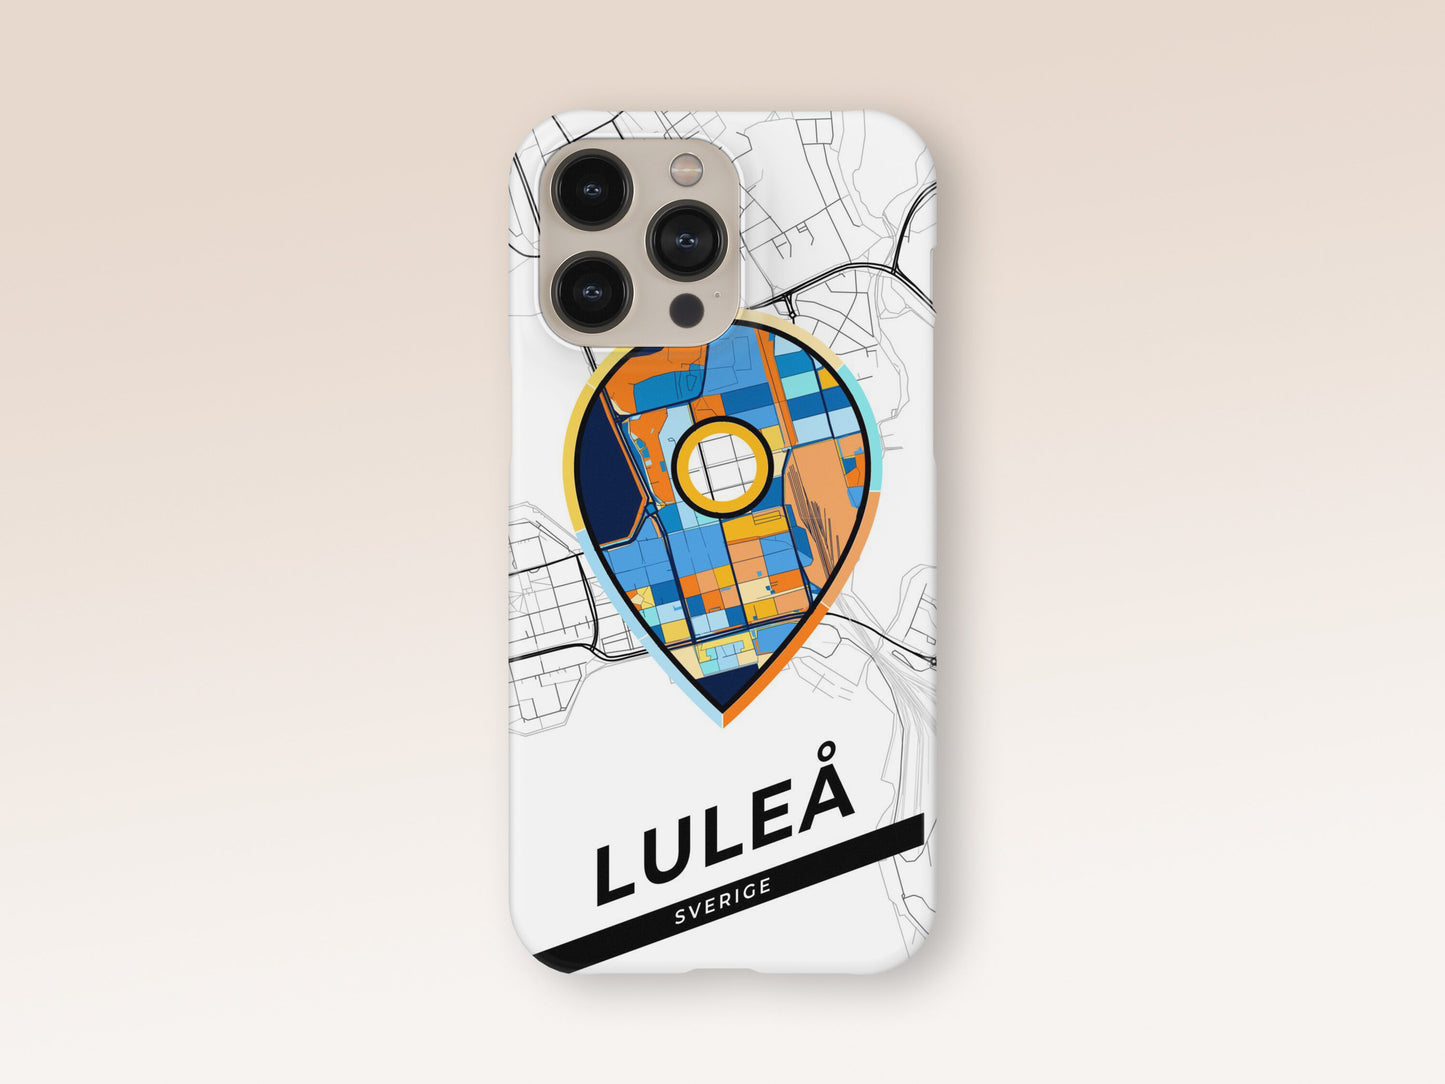 Luleå Sweden slim phone case with colorful icon. Birthday, wedding or housewarming gift. Couple match cases. 1